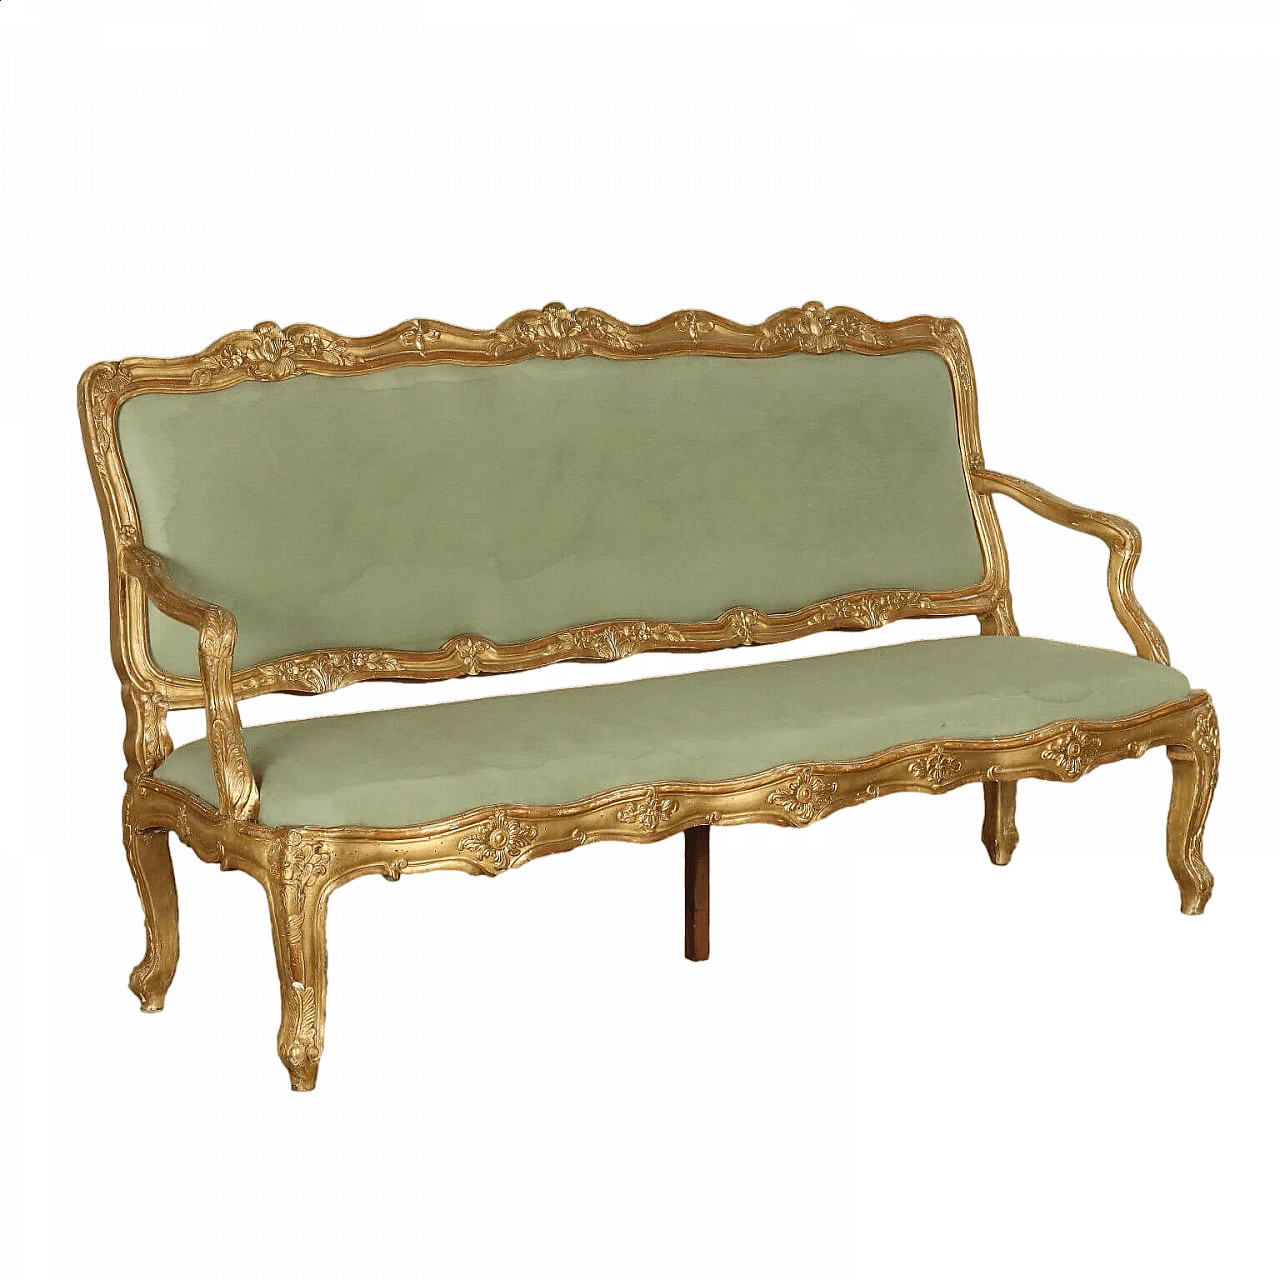 Carved and gilded wooden upholstered sofa in Baroque style, late 19th century 11